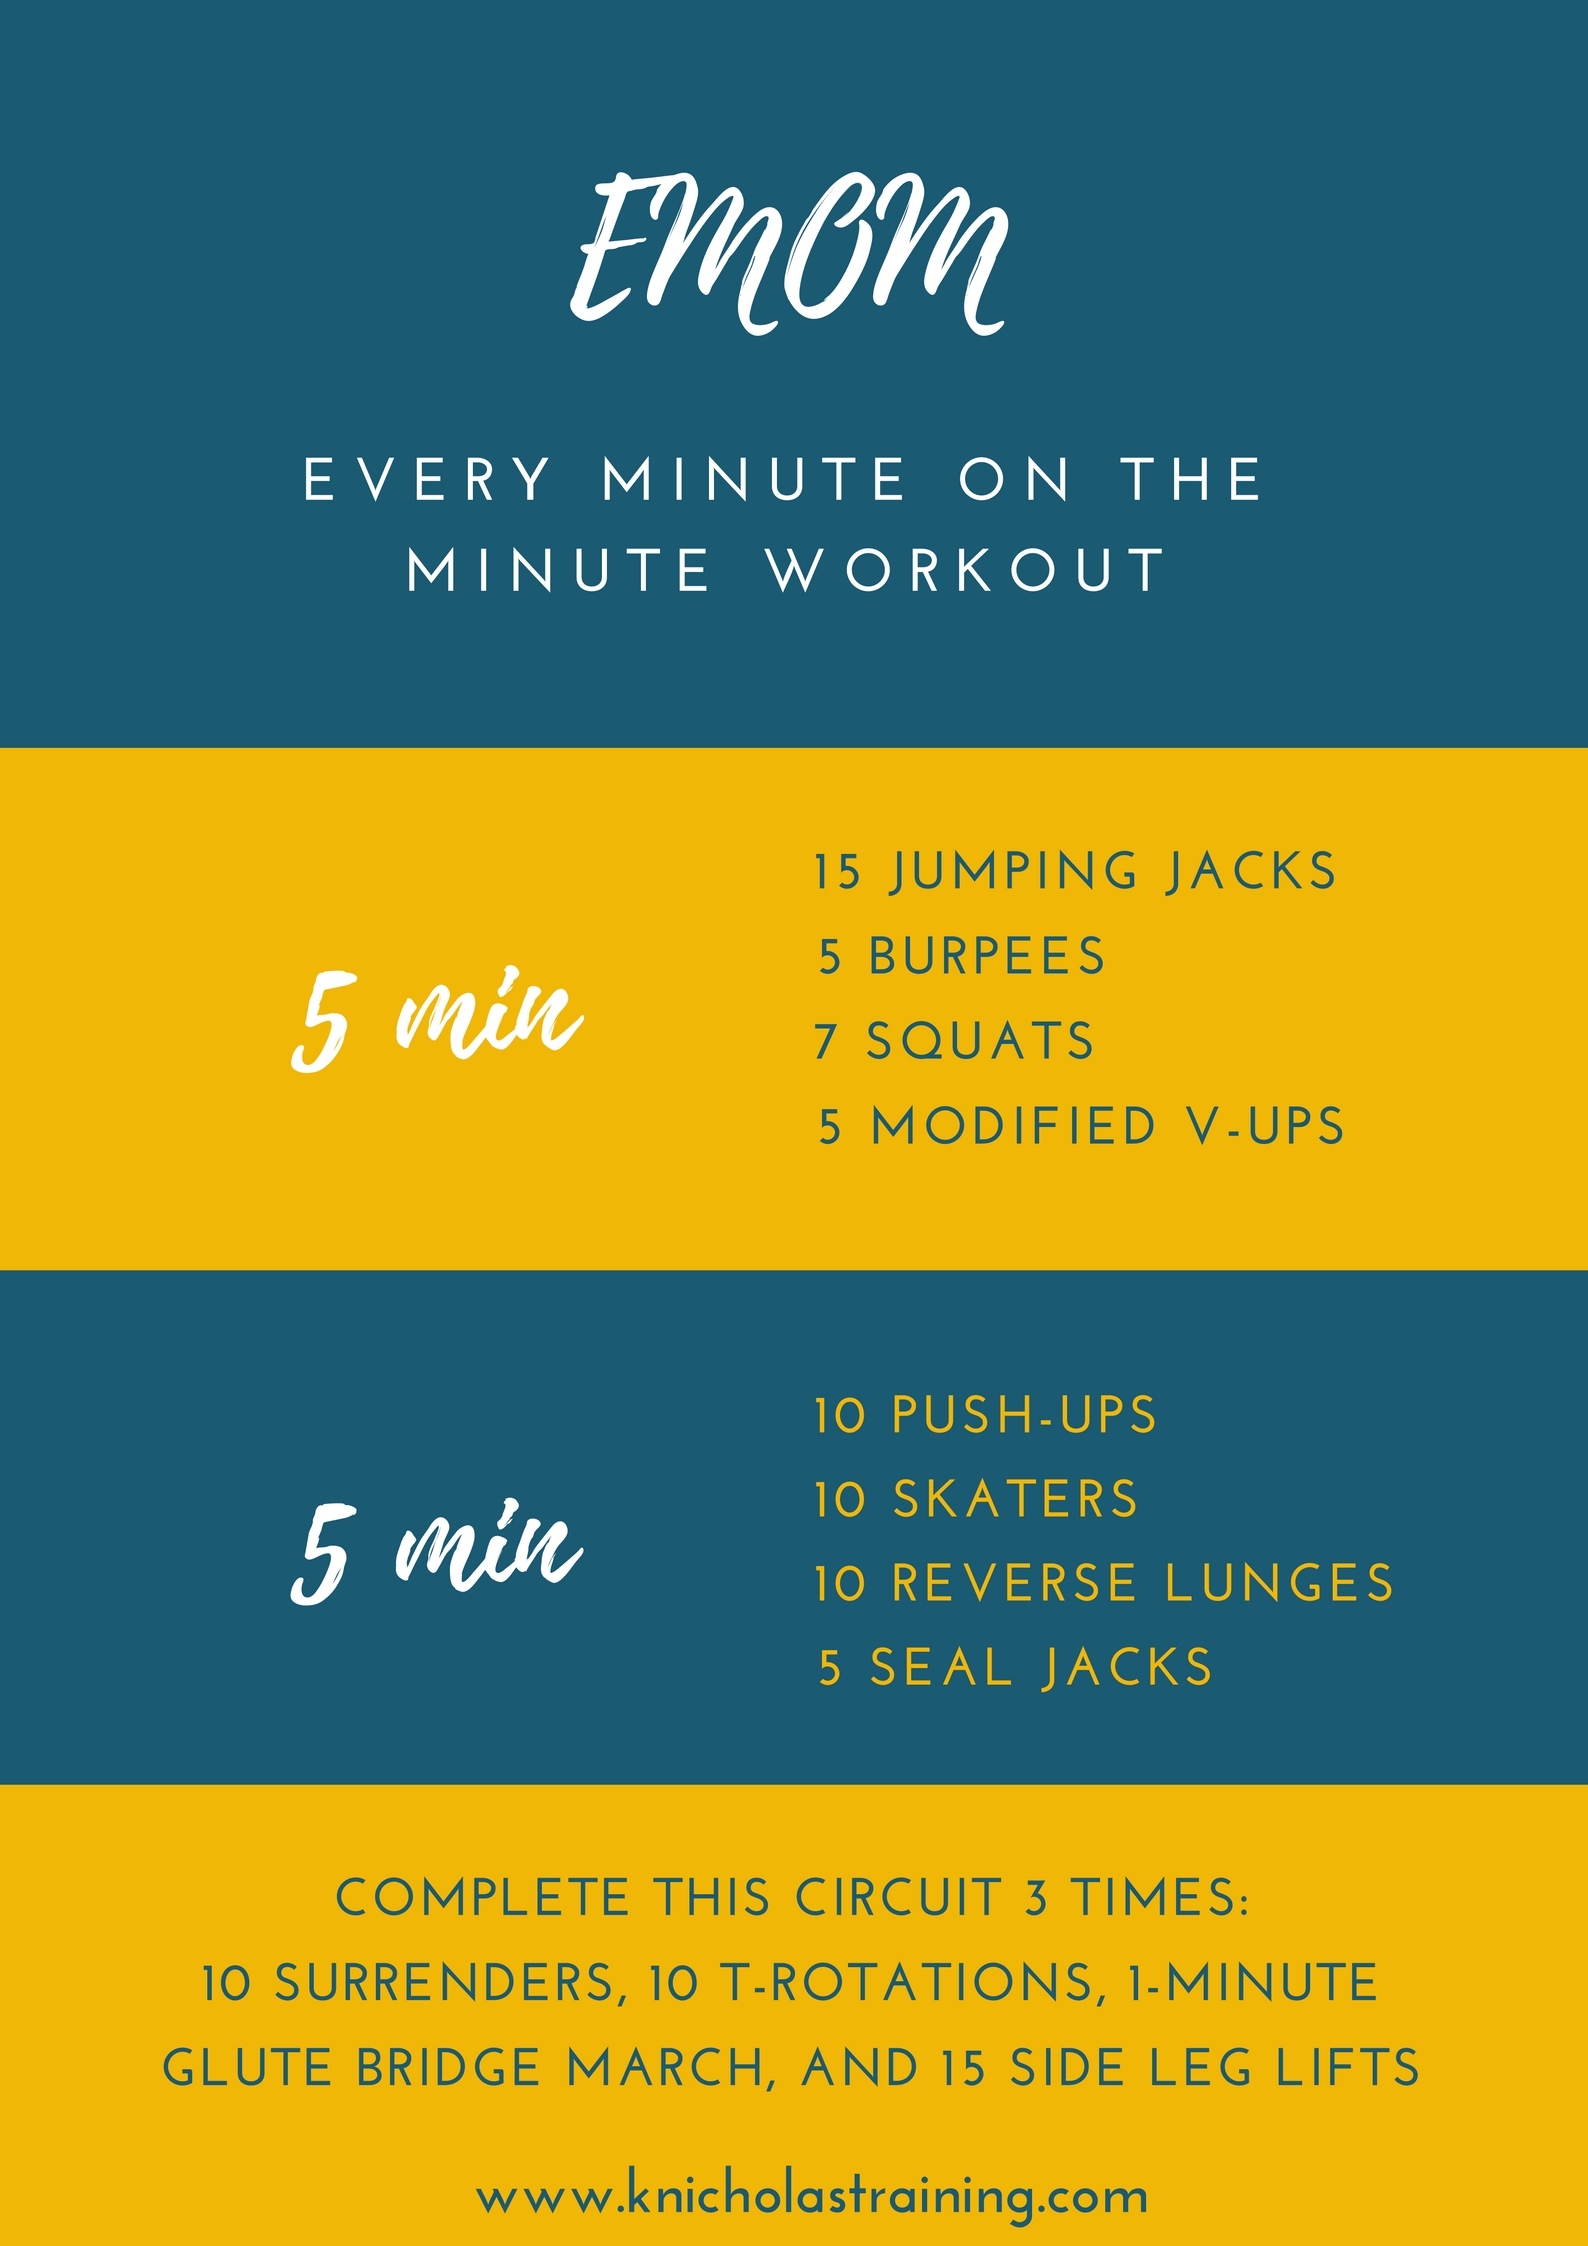 Every Minute on the Minute Interval Workout